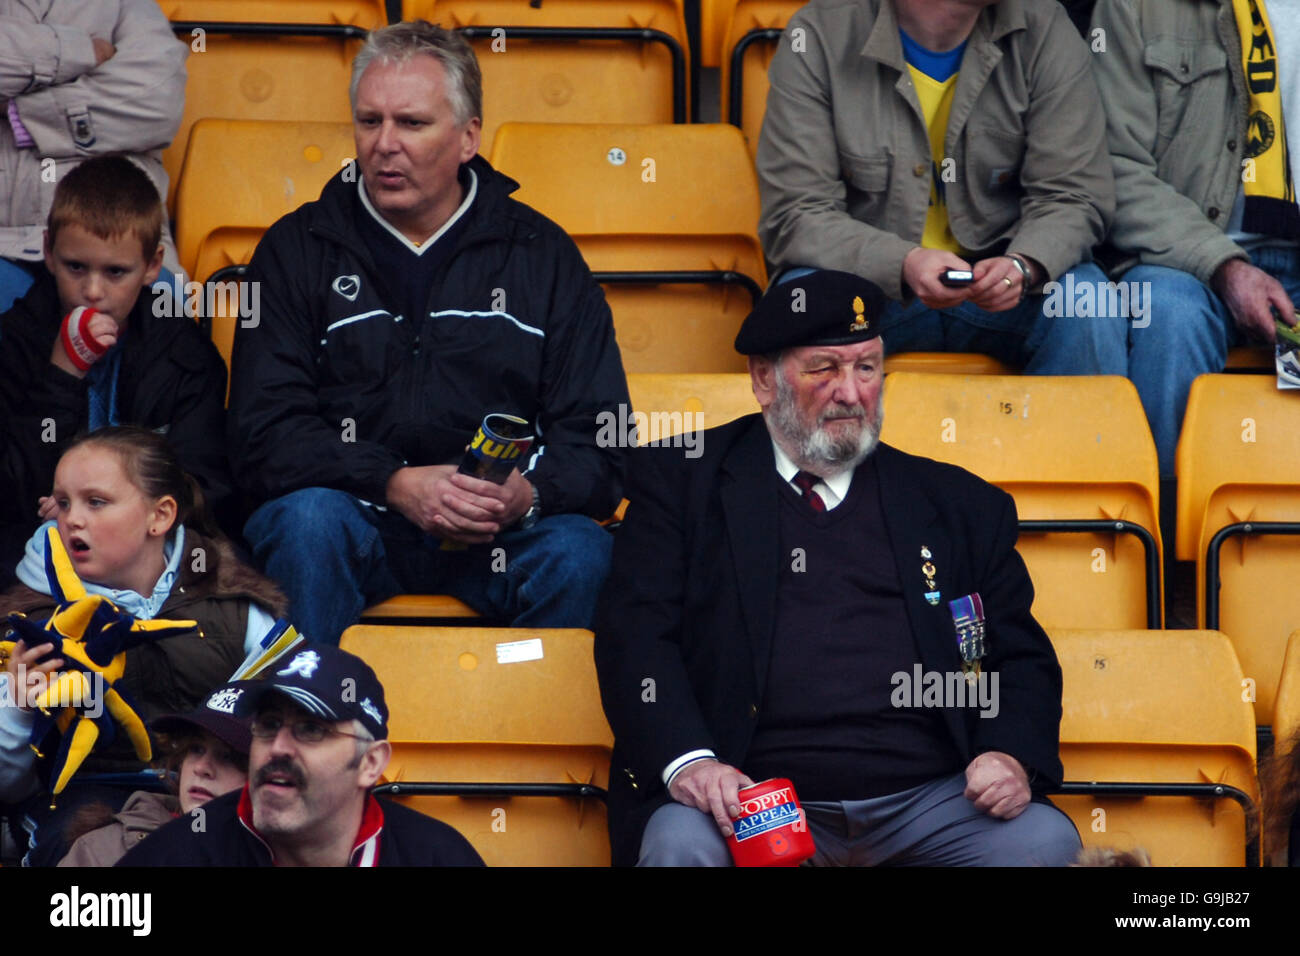 Soccer - Coca-Cola Football League Two - Torquay United v Accrington Stanley - Plainmoor. Torquay United fans watch the game Stock Photo